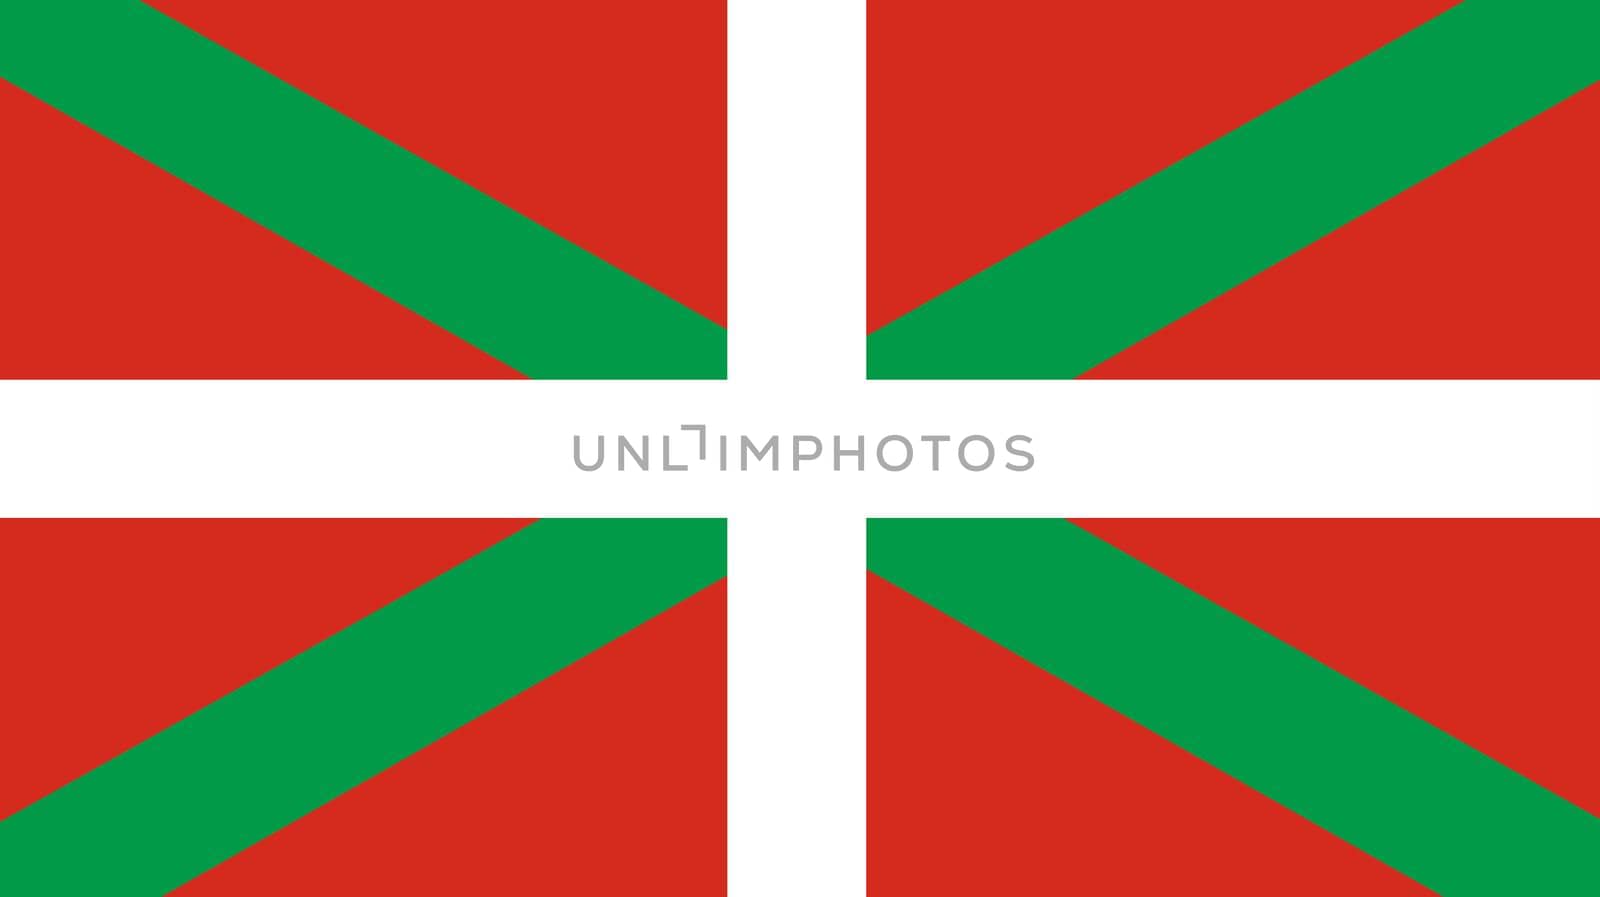 The flag of the Basque Country Spain Autonomous Community in Europe 